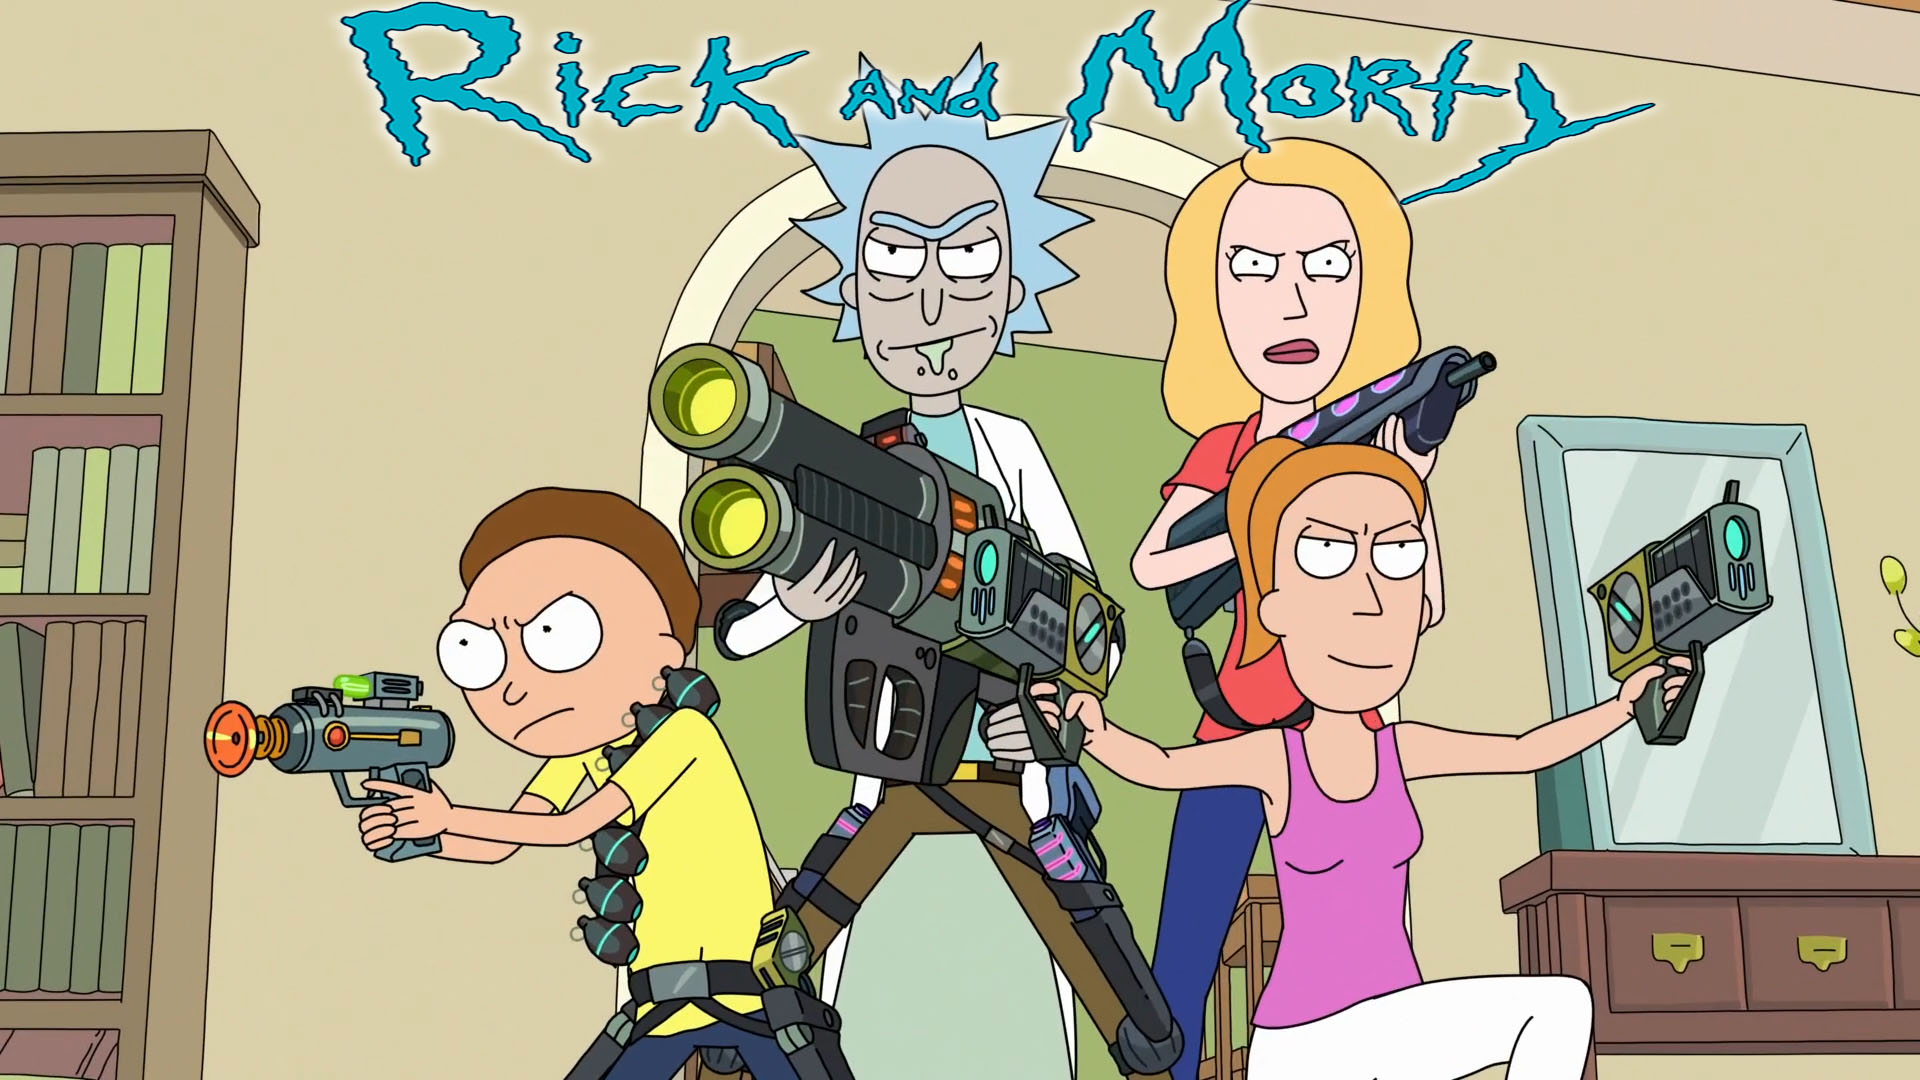 rick and morty, tv show, beth smith, morty smith, rick sanchez, summer smith lock screen backgrounds